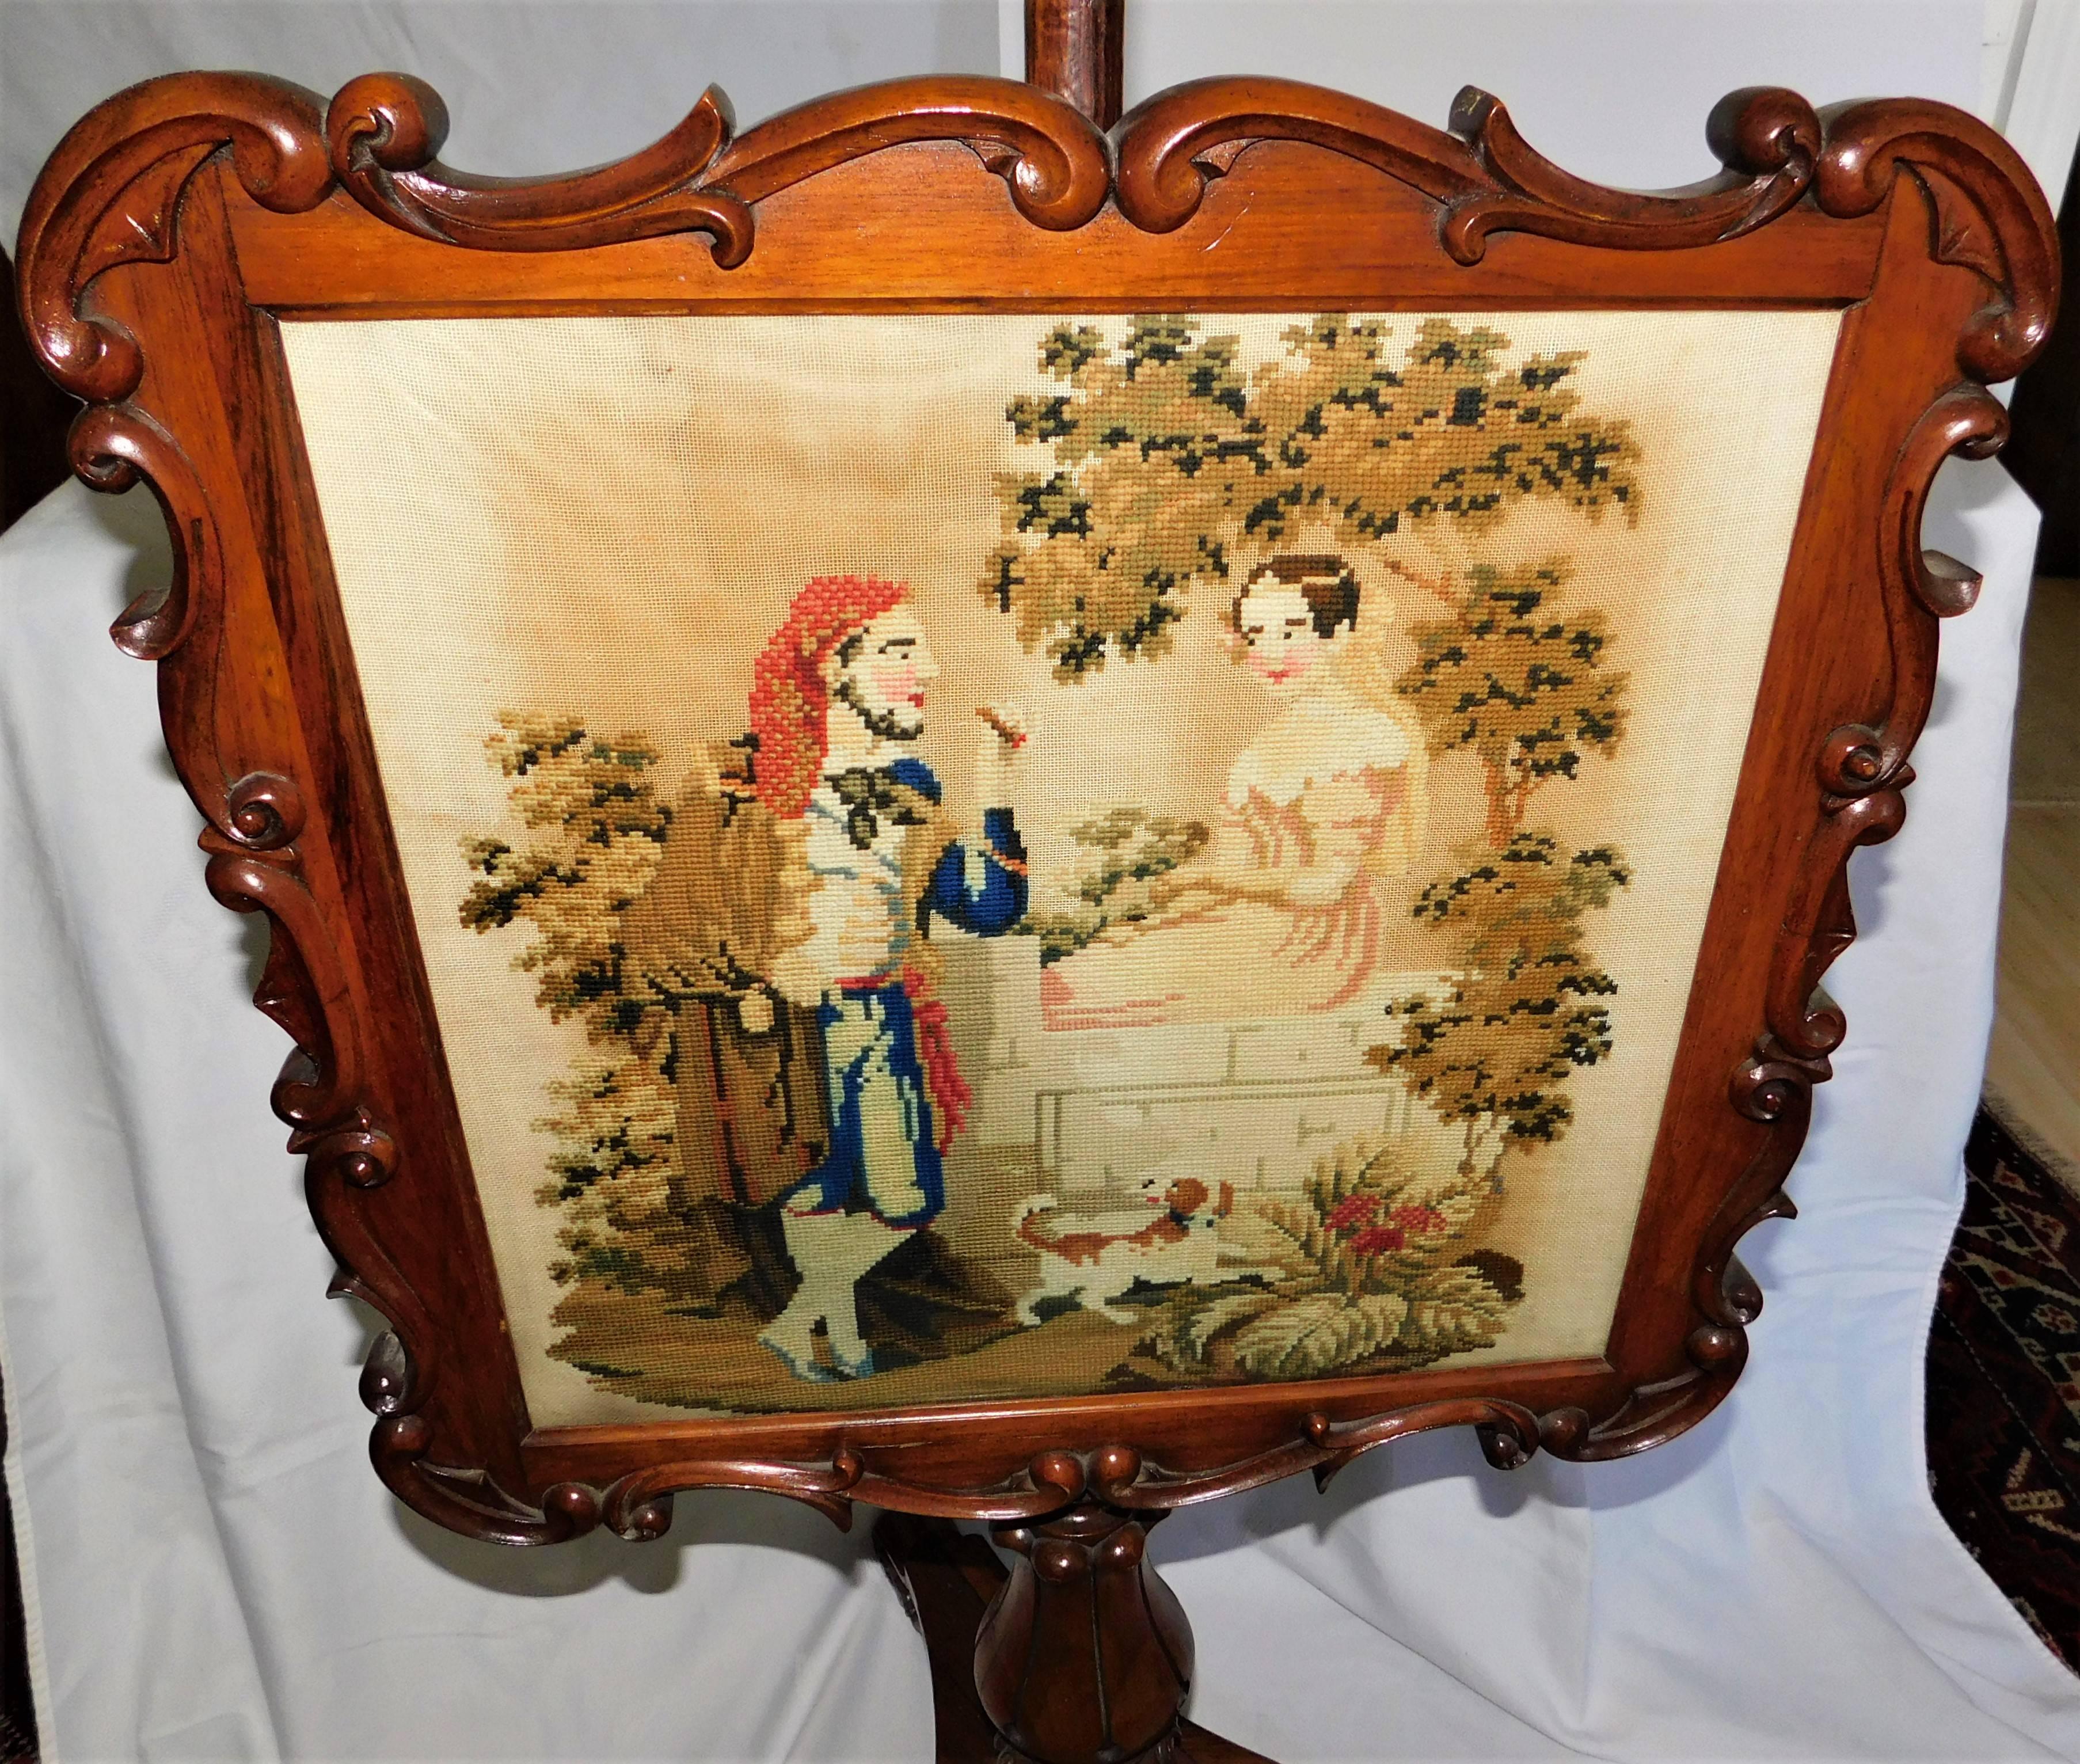 Antique Victorian floor fire screen with mahogany frame stands on three mahogany legs Romeo and Juliet type scene embroidery design, English, circa 1860.